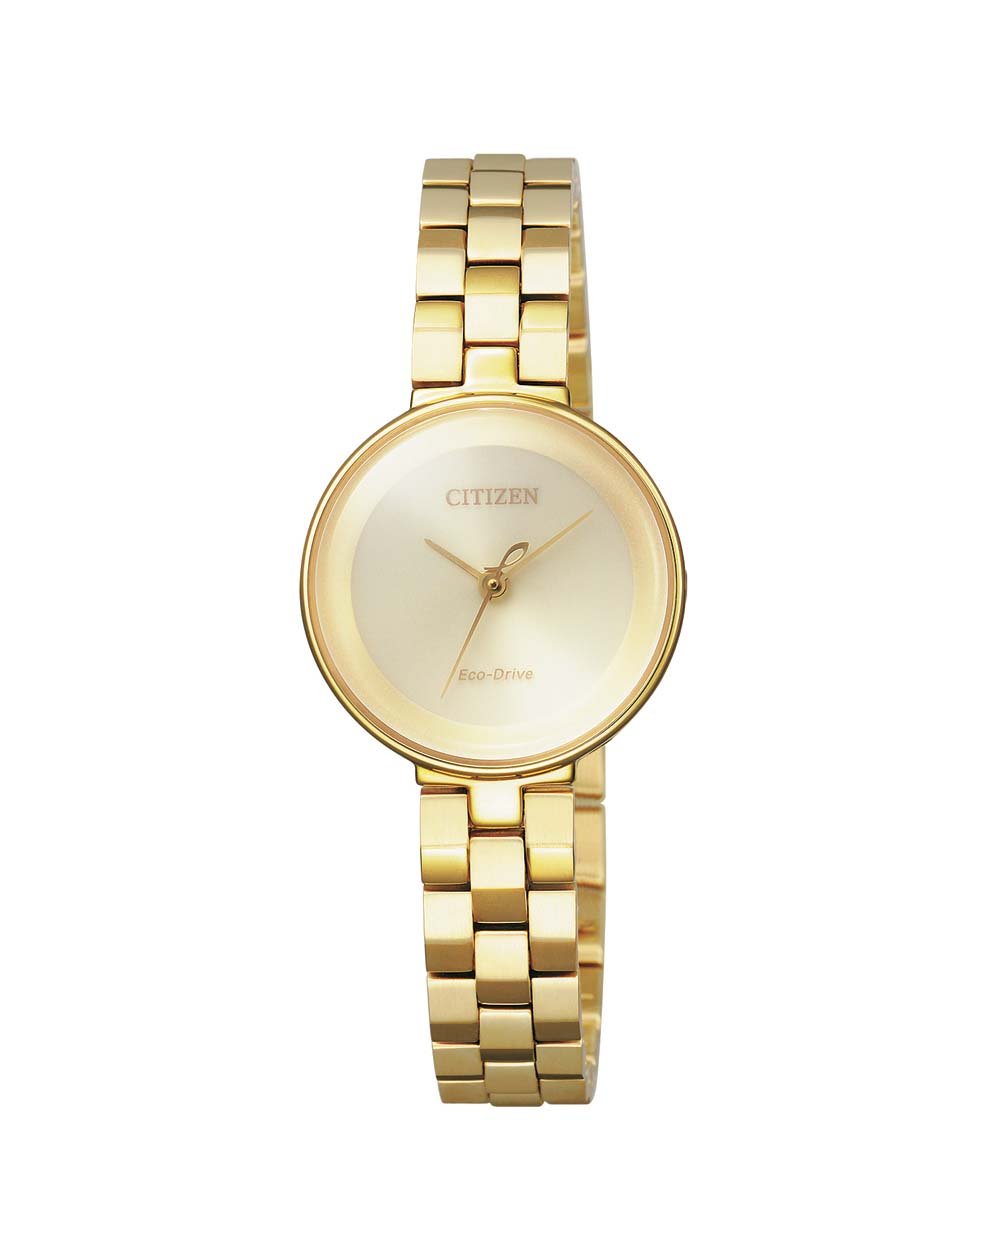 Citizen Gold Eco-drive Dial Ladies Watch Ew5502-51p In Gold / Gold Tone